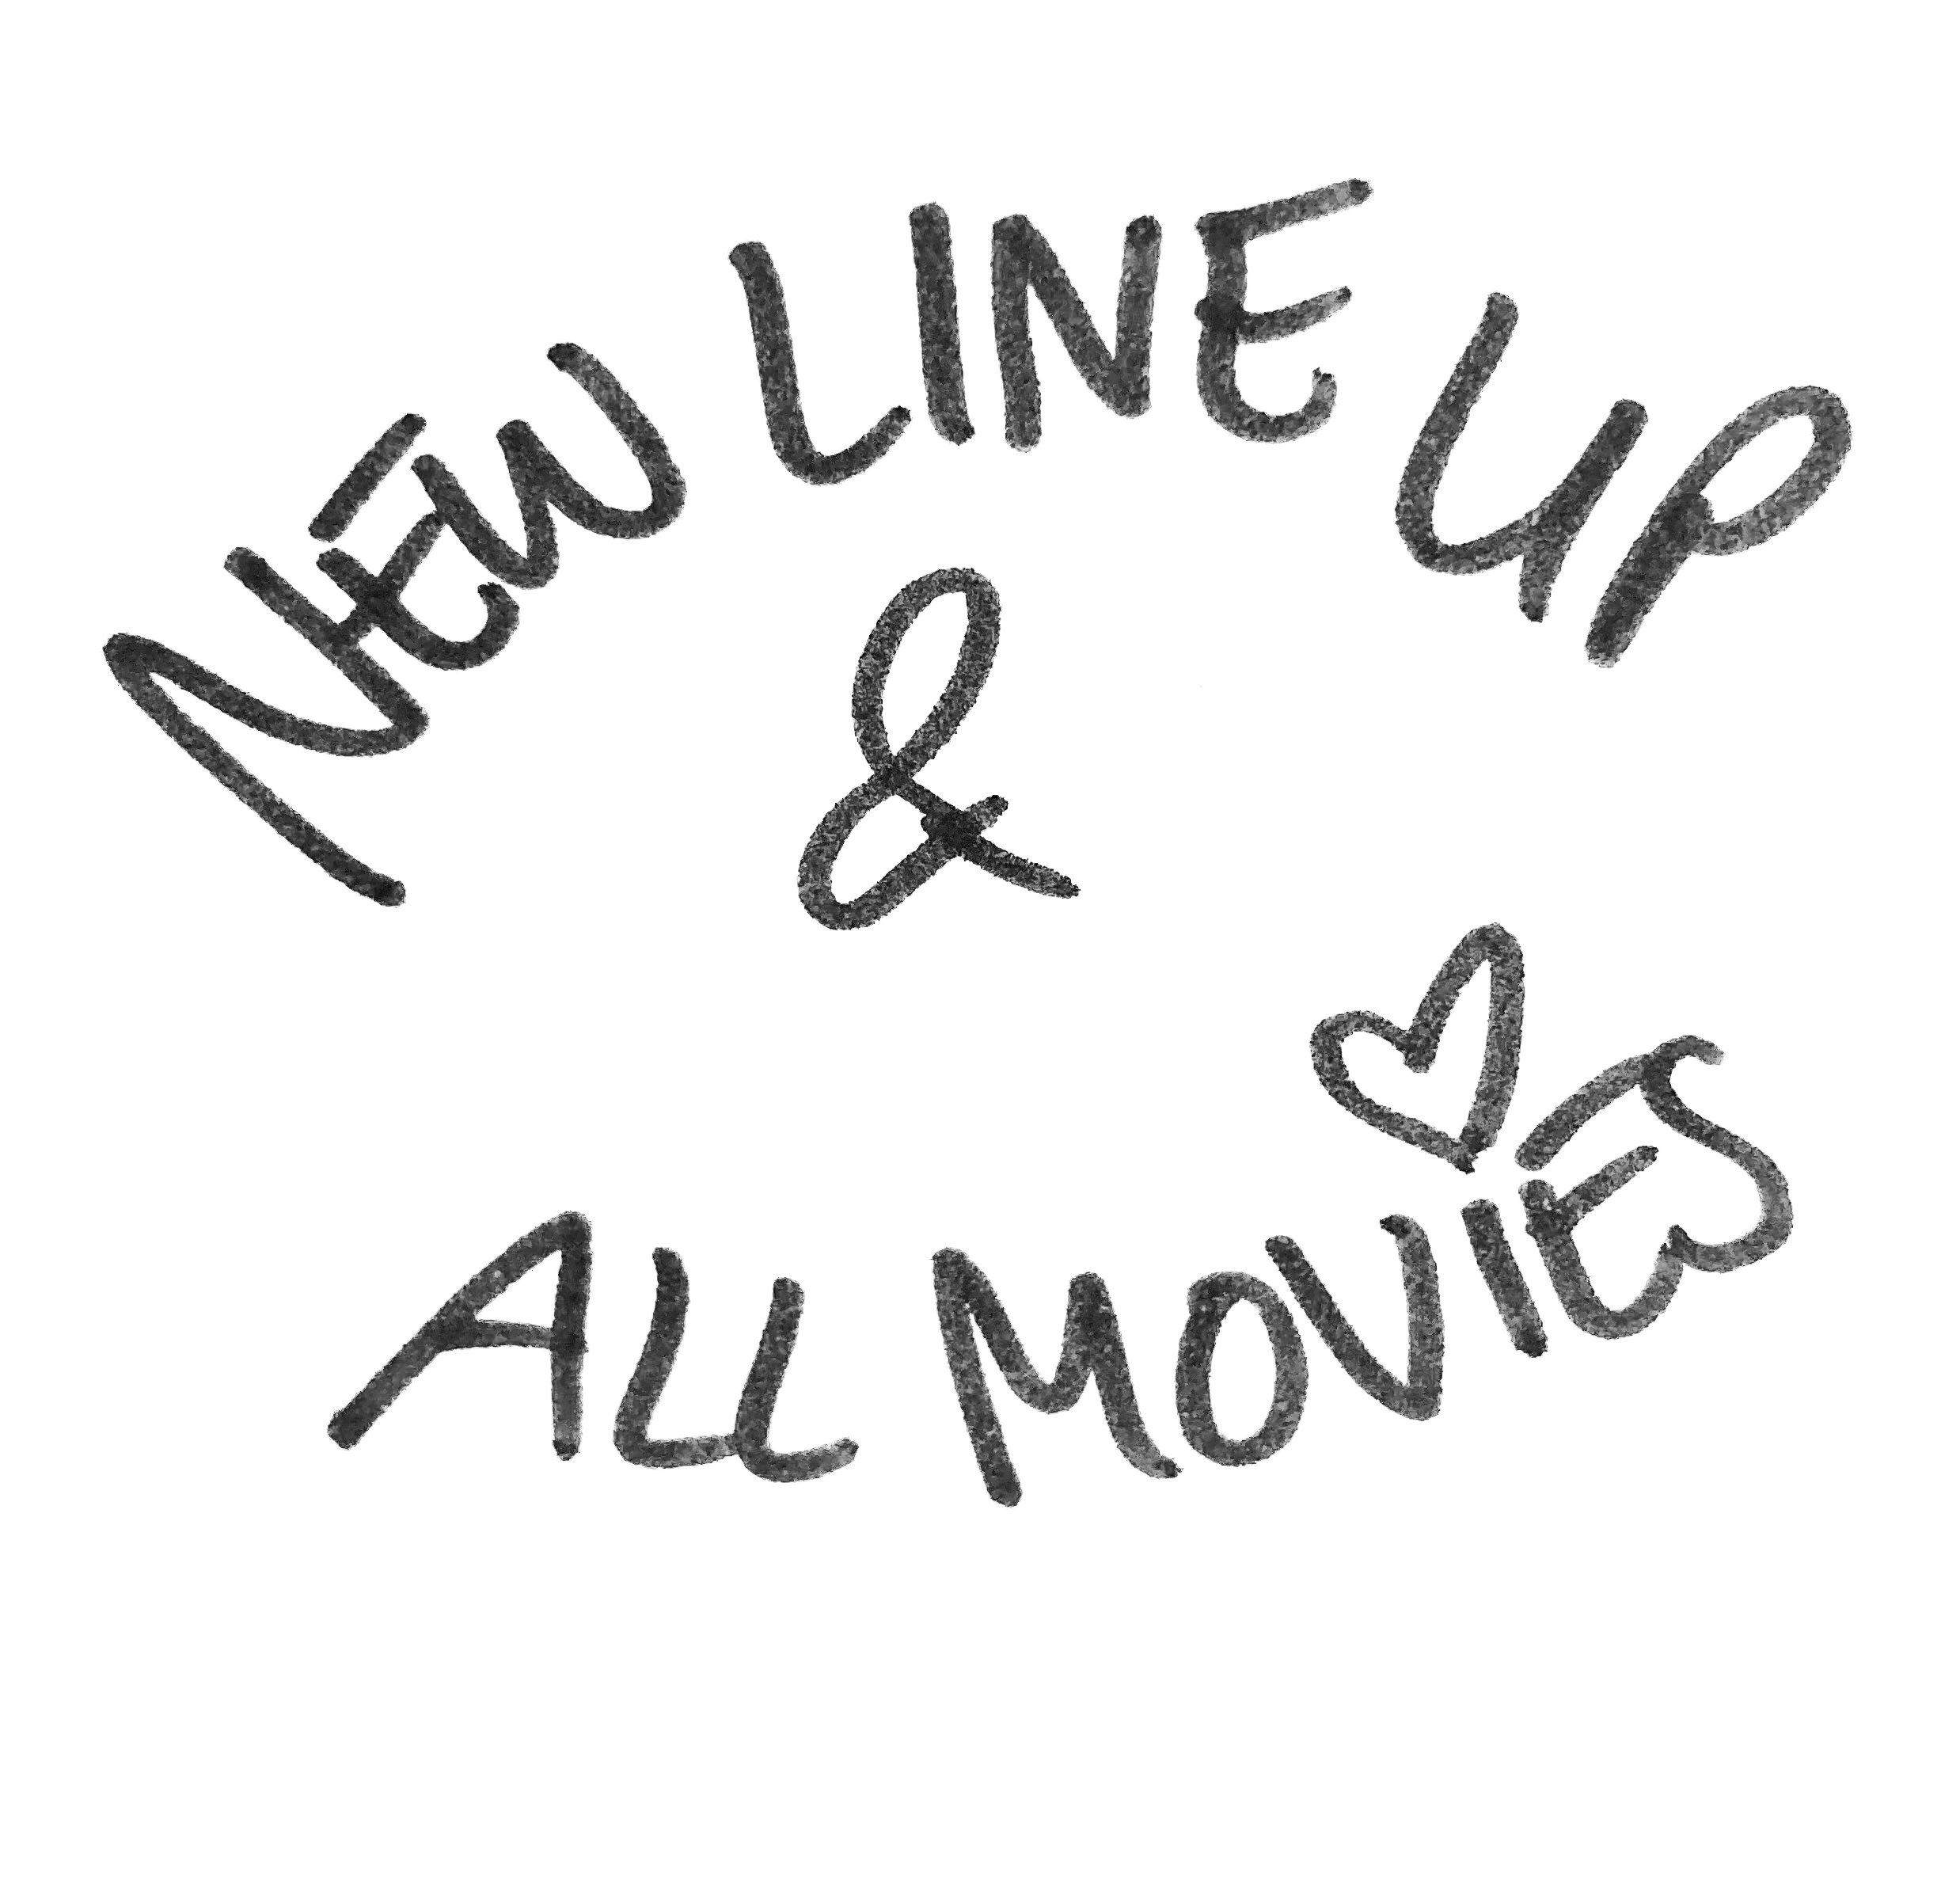 New Line Up and Movies